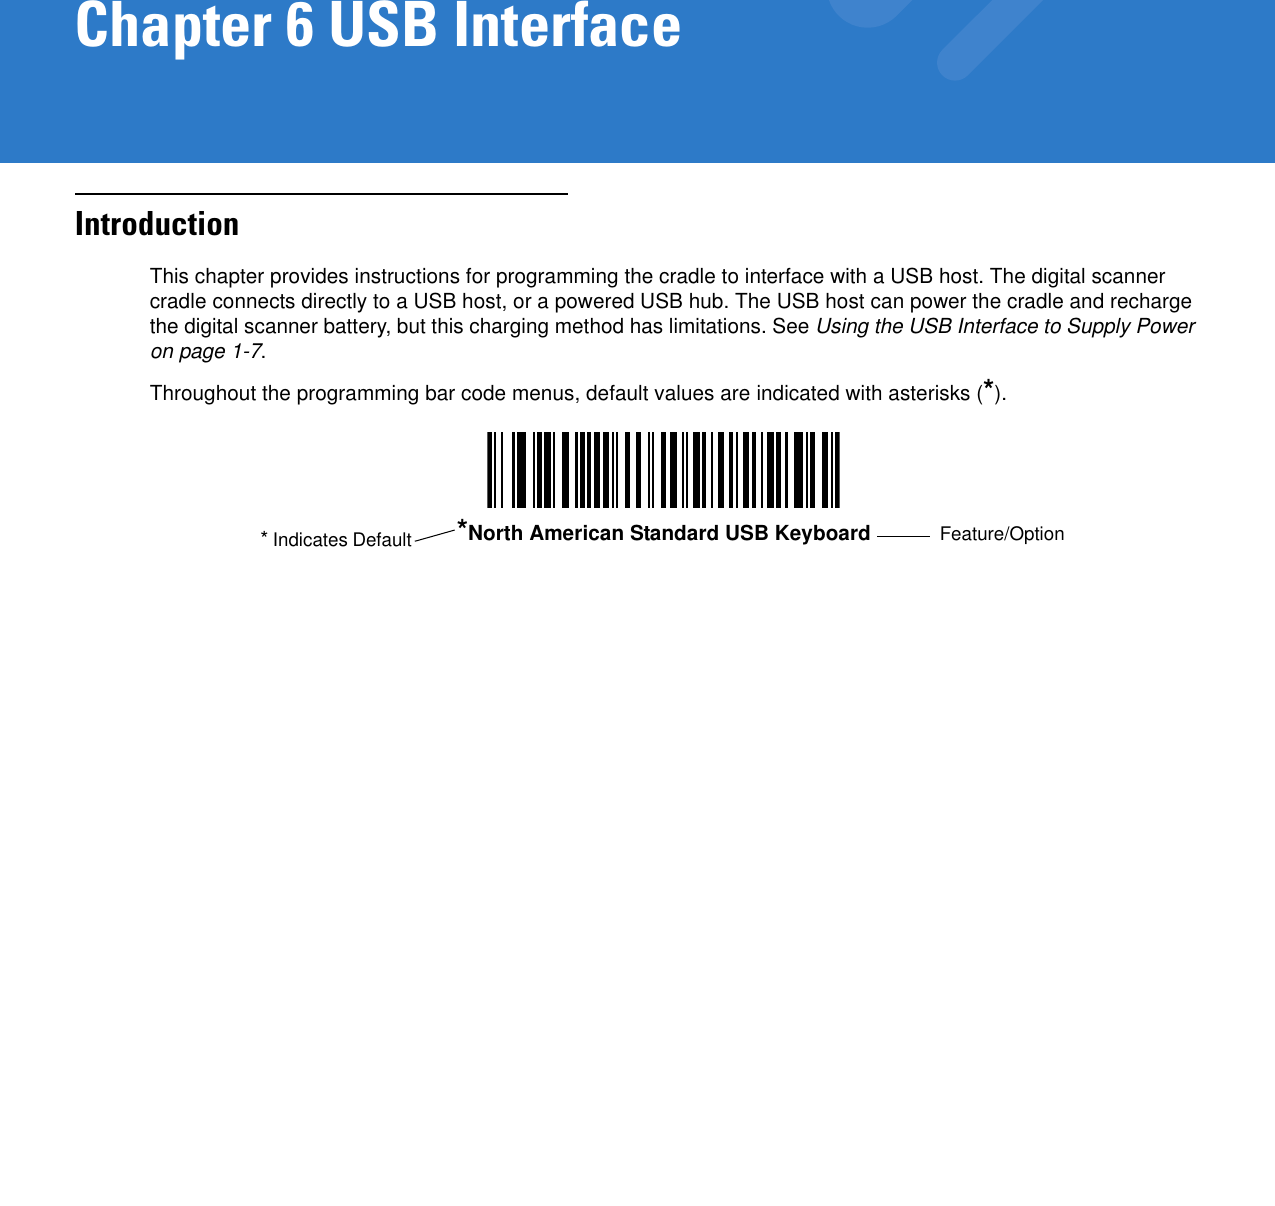 Chapter 6 USB InterfaceIntroductionThis chapter provides instructions for programming the cradle to interface with a USB host. The digital scanner cradle connects directly to a USB host, or a powered USB hub. The USB host can power the cradle and recharge the digital scanner battery, but this charging method has limitations. See Using the USB Interface to Supply Power on page 1-7.Throughout the programming bar code menus, default values are indicated with asterisks (*).*North American Standard USB Keyboard Feature/Option* Indicates Default